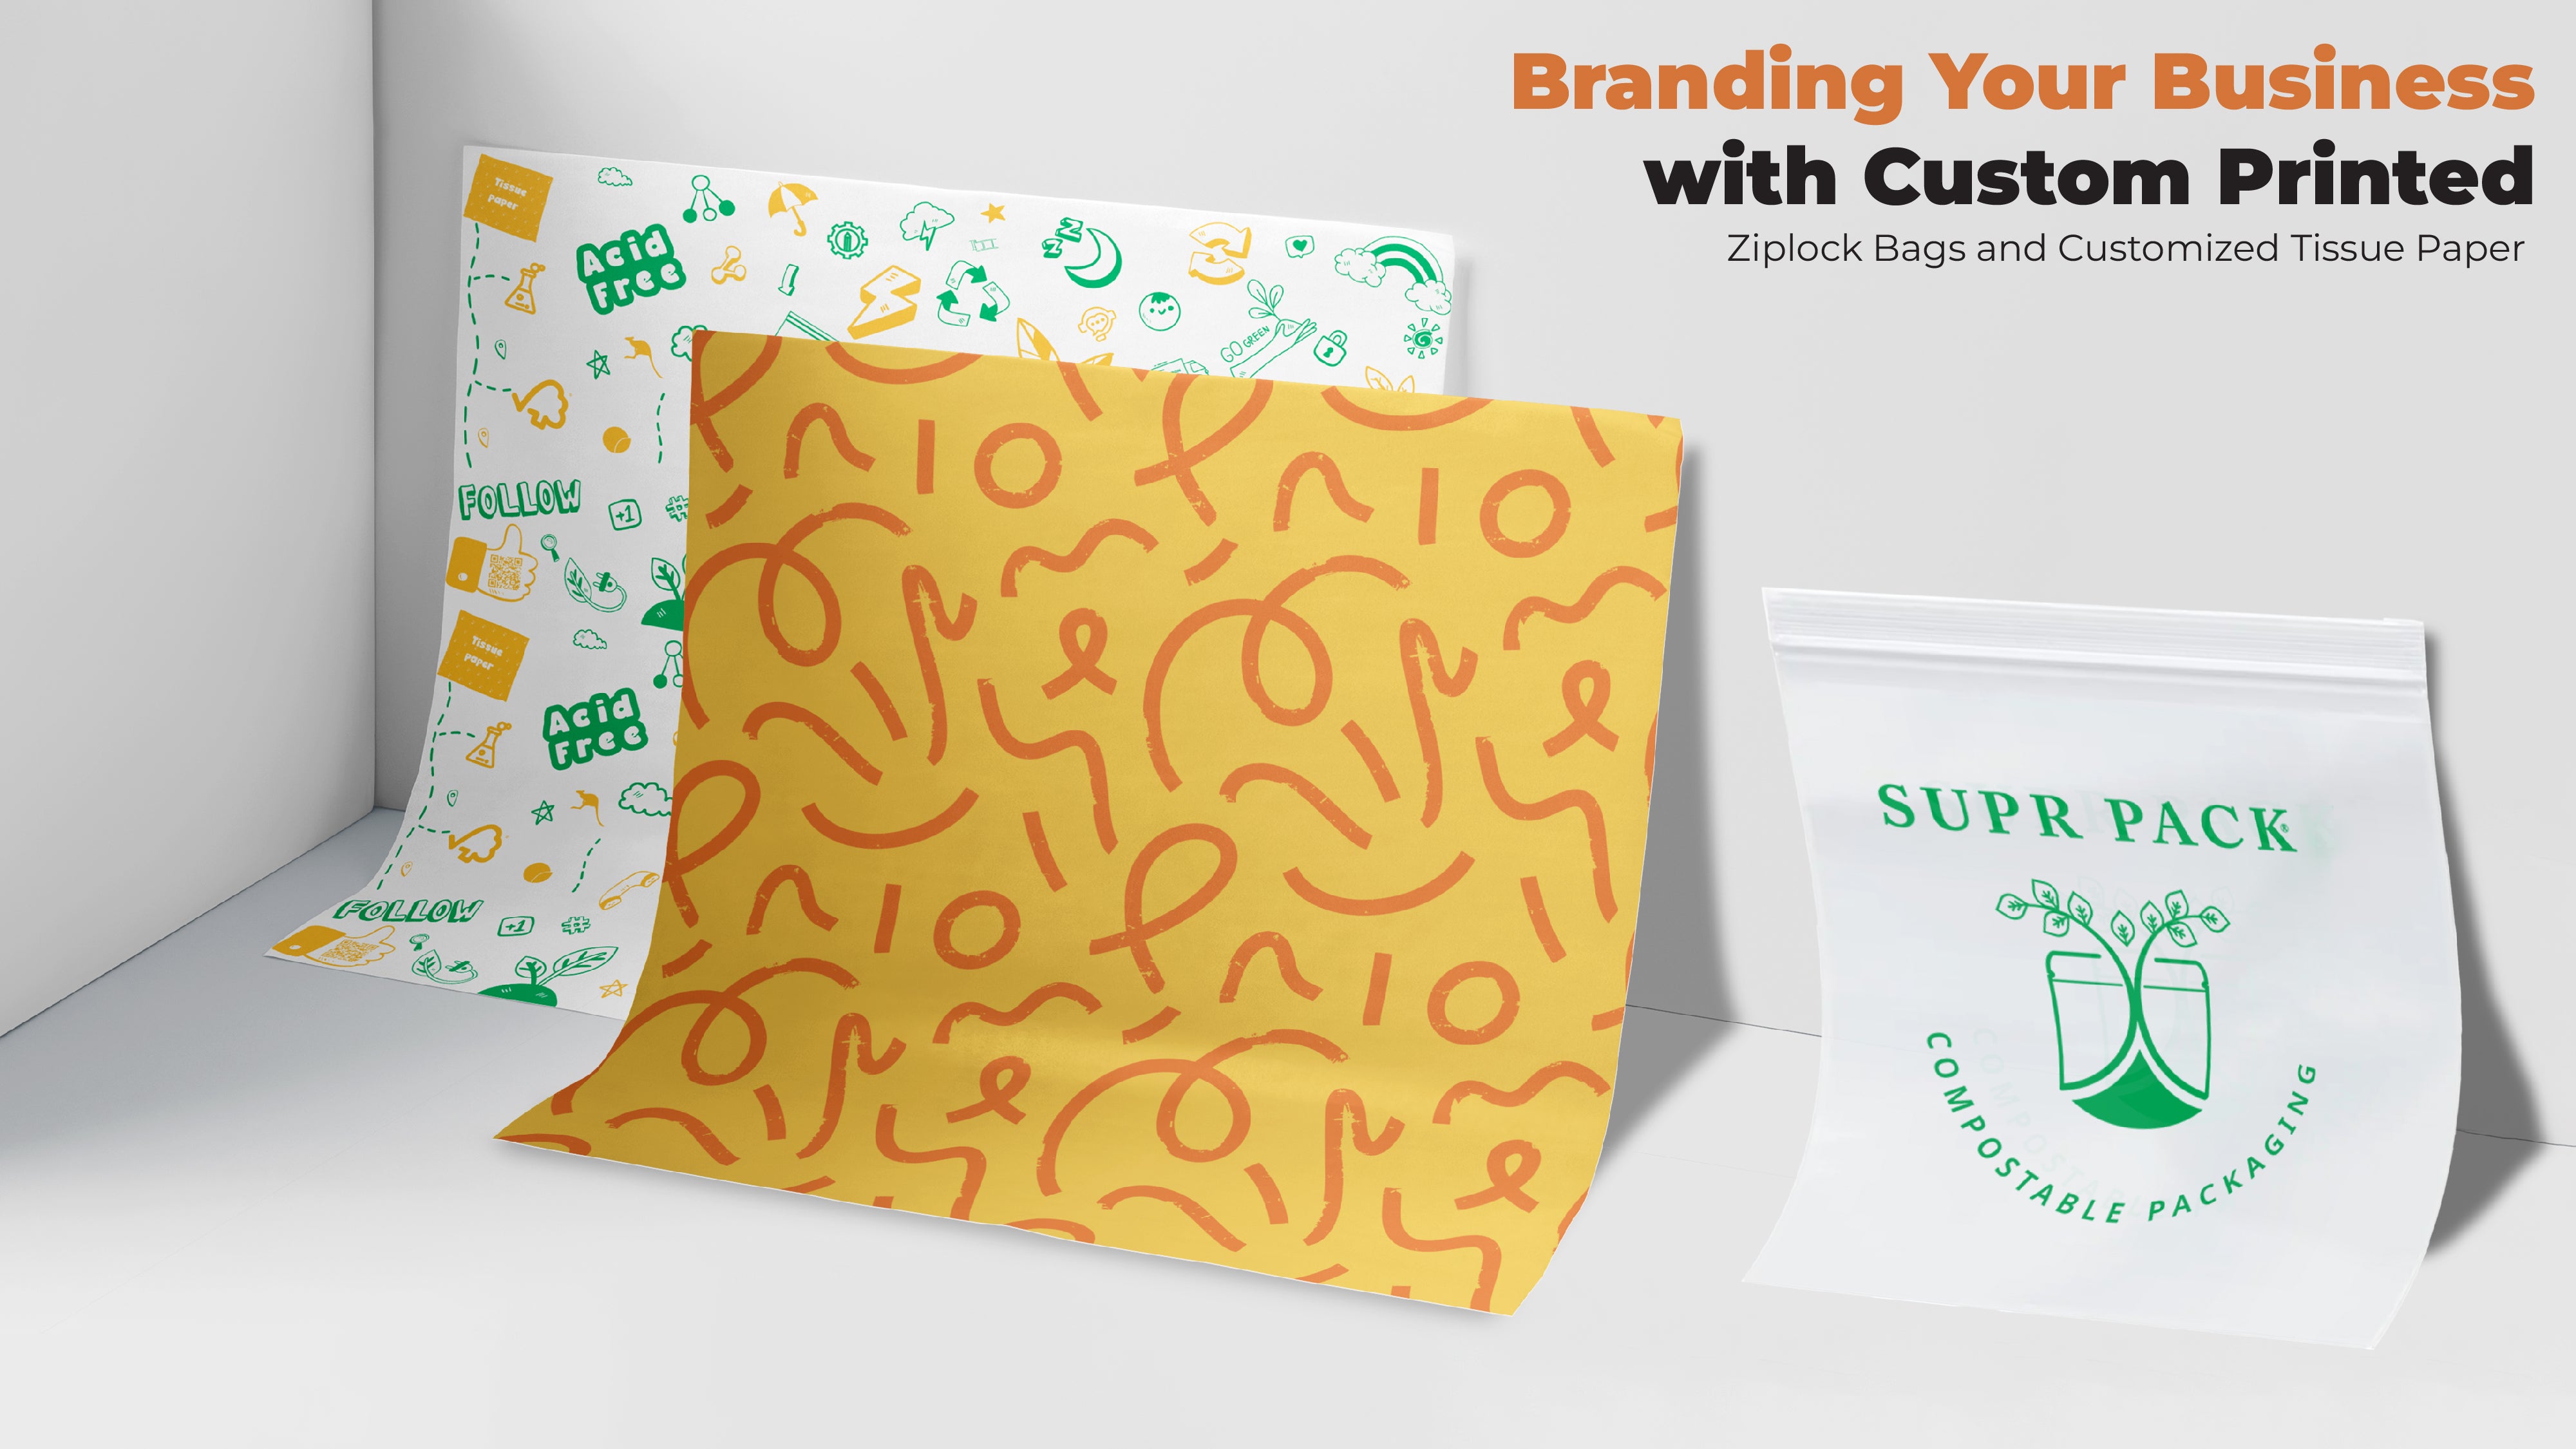 Unveiling Your Brand: The Impact of Custom Tissue Paper in Packaging, by  Suprpack Aus